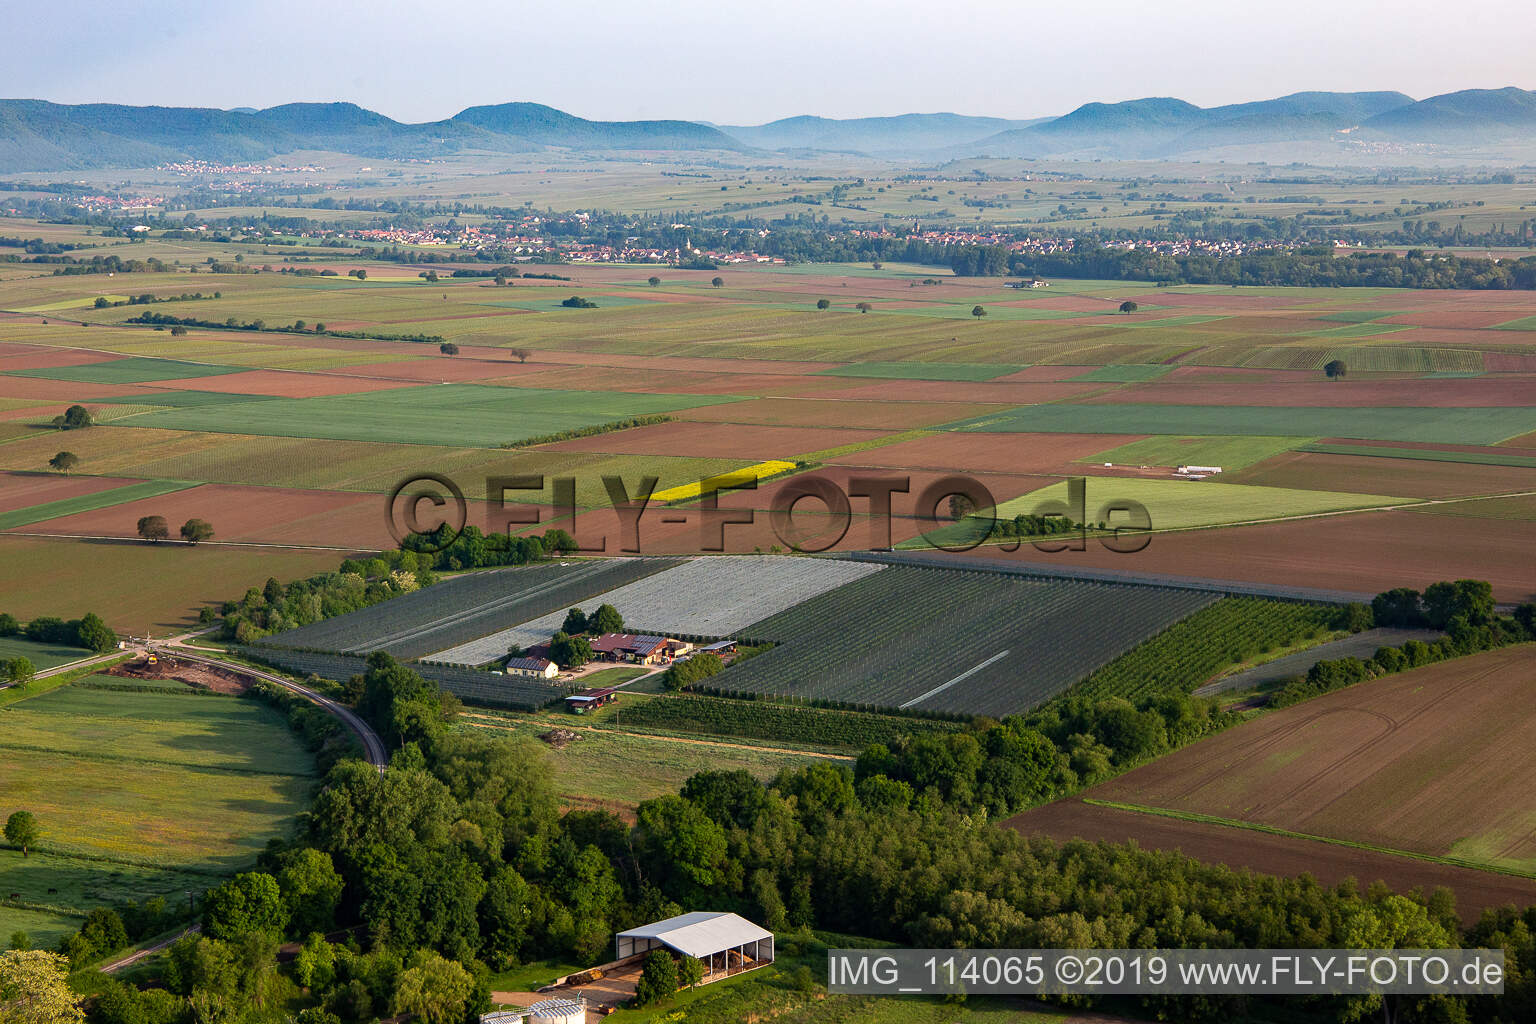 Fruit cultivation plantation of Obst- and Spagelhof Gensheimer in Winden in the state Rhineland-Palatinate, Germany